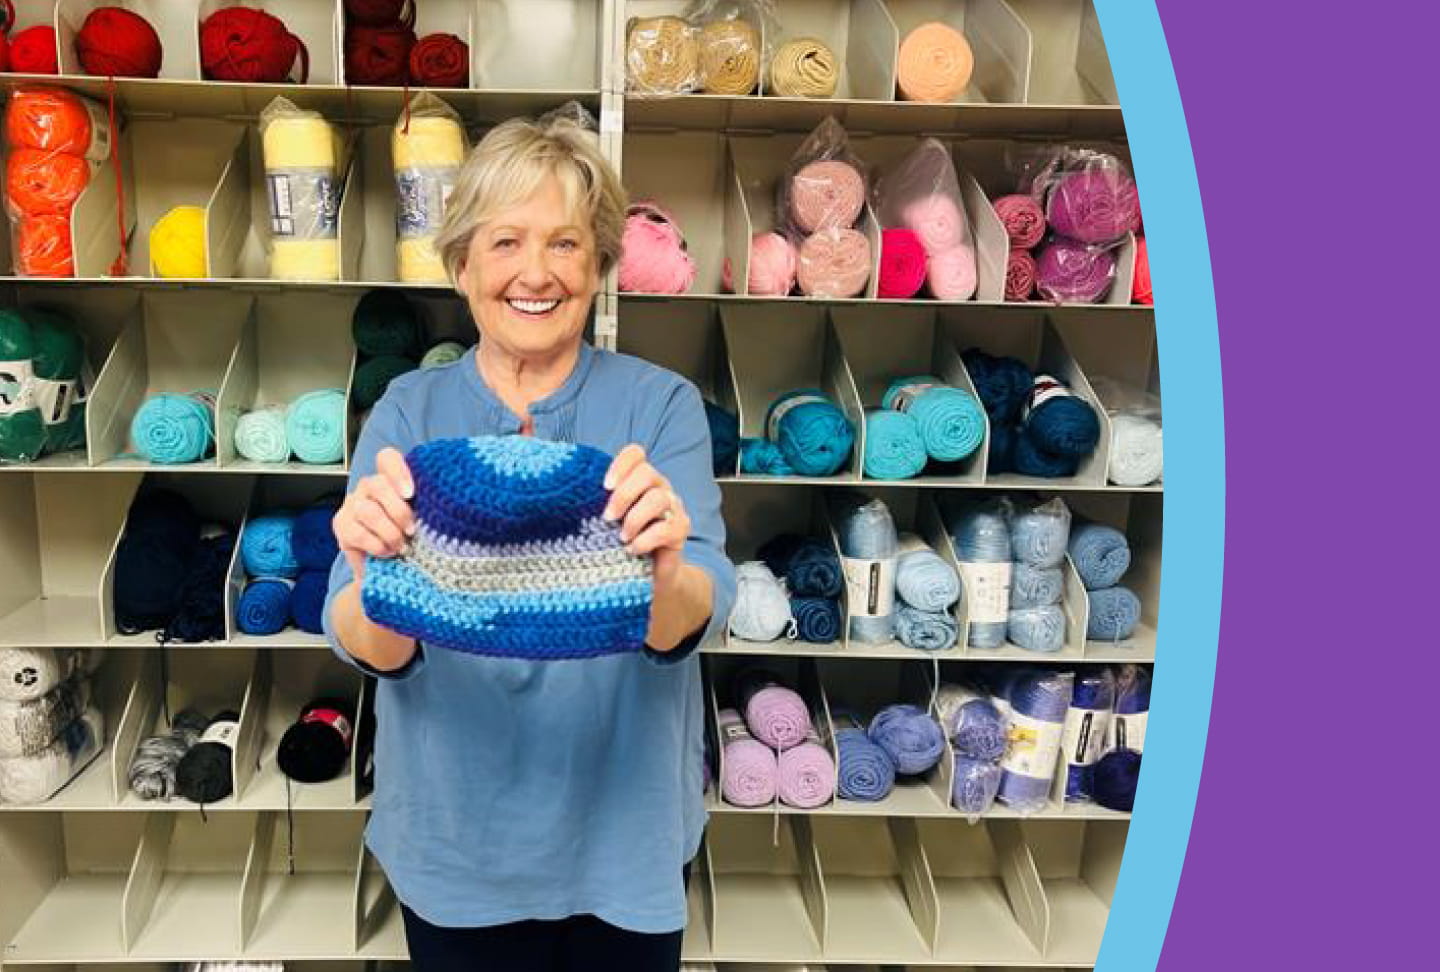 Kathy DeJoseph holding a knitted hat in front of wall of yarn